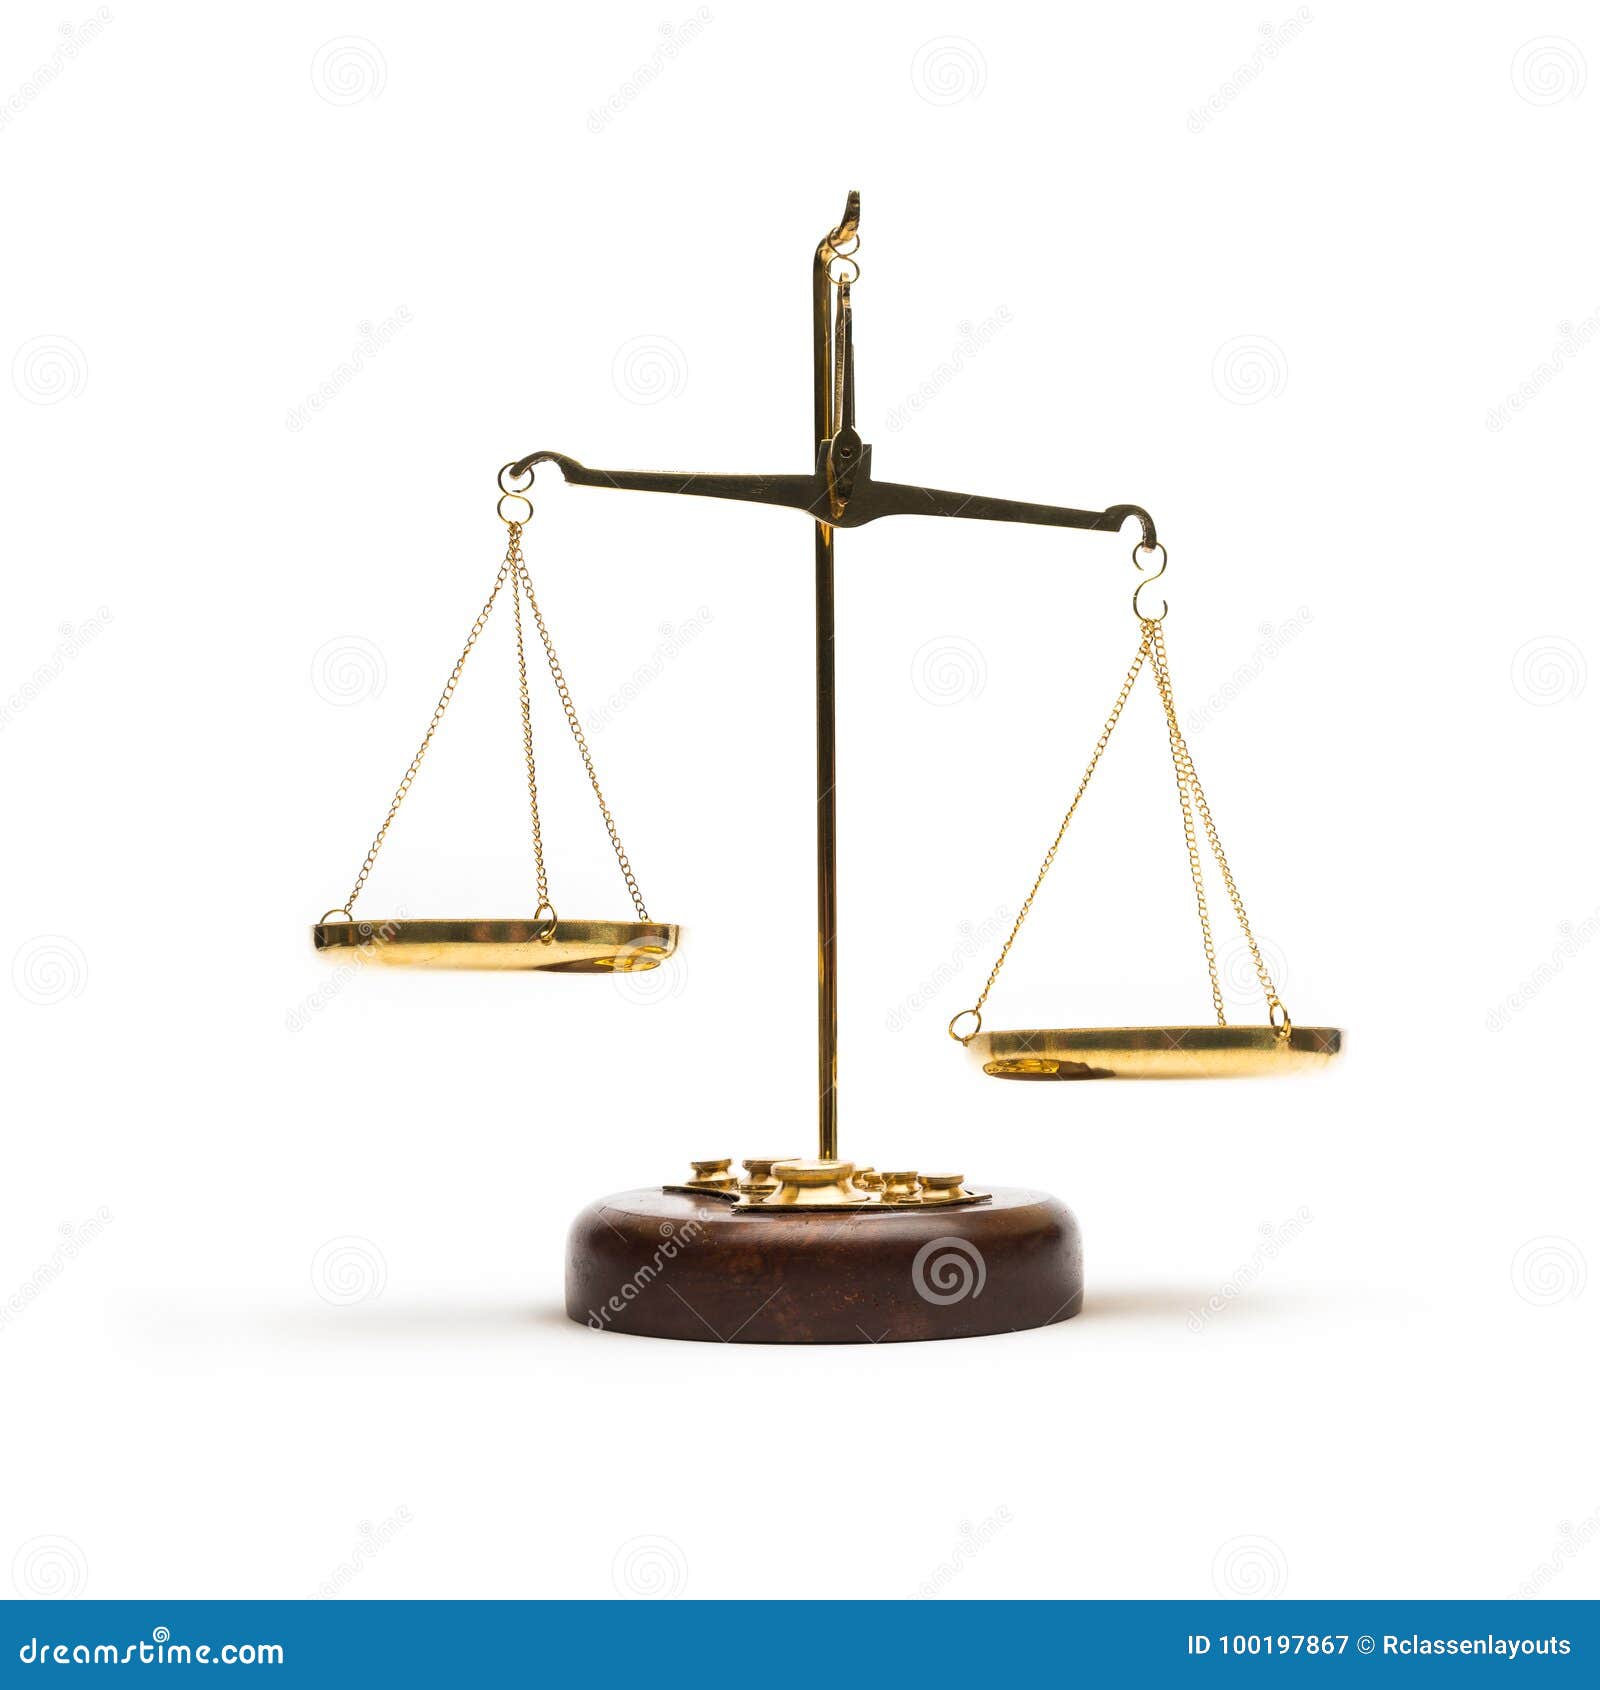 https://thumbs.dreamstime.com/z/justice-scale-isolated-white-background-ideal-websites-magazines-layouts-scales-justice-white-background-100197867.jpg